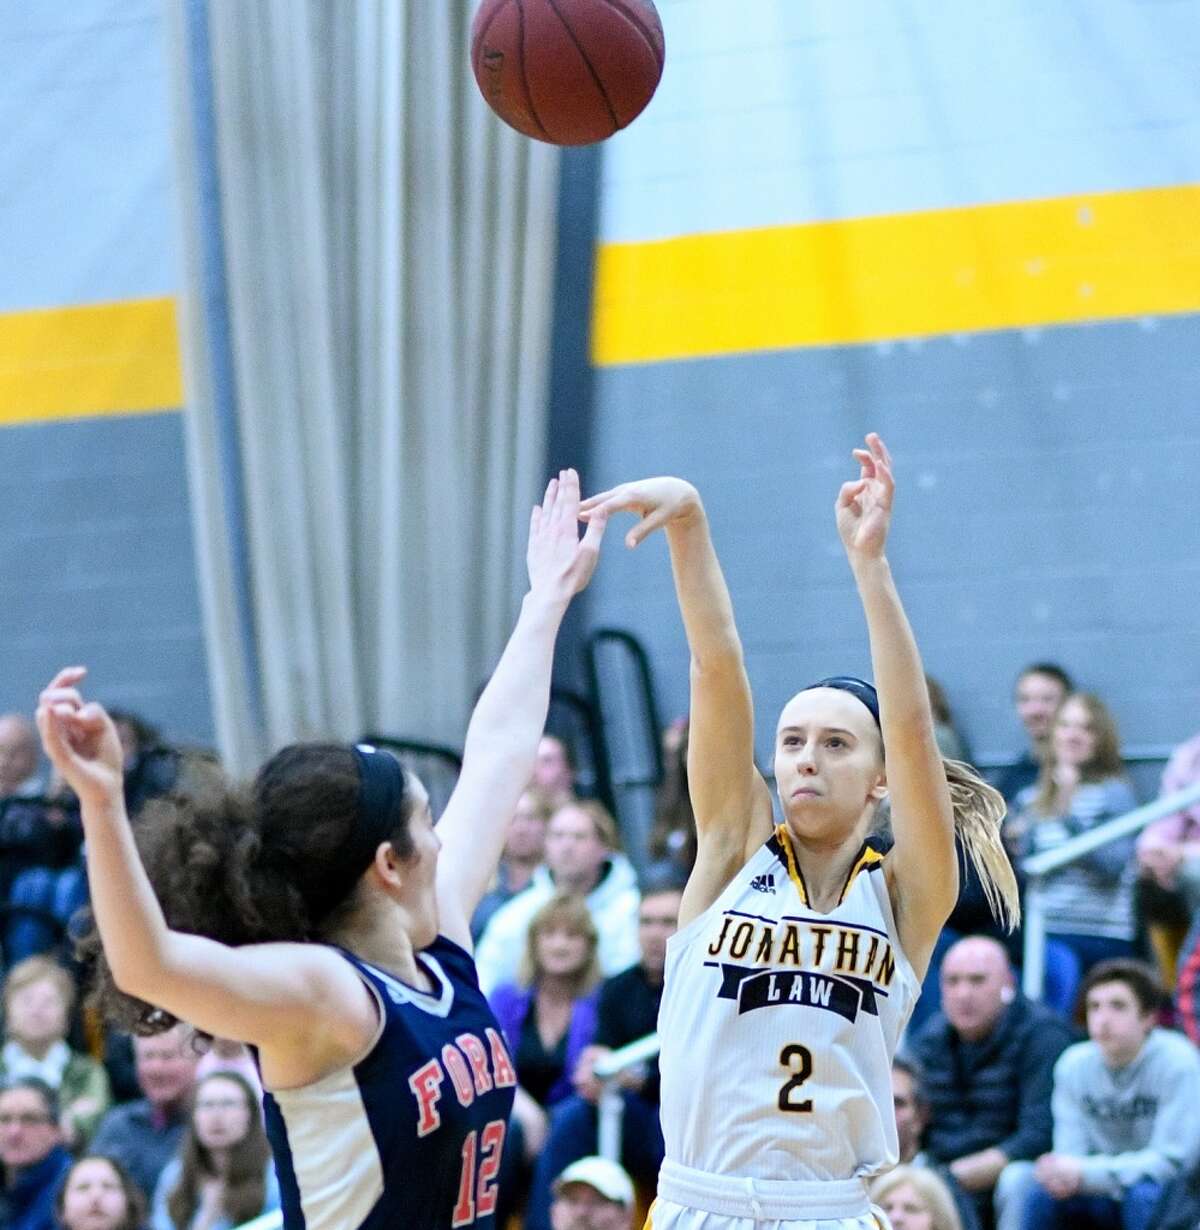 Cali Jolley releases her game-tying 3-pointer that sent the game to overtime vs. Foran on Jan. 18, 2019.